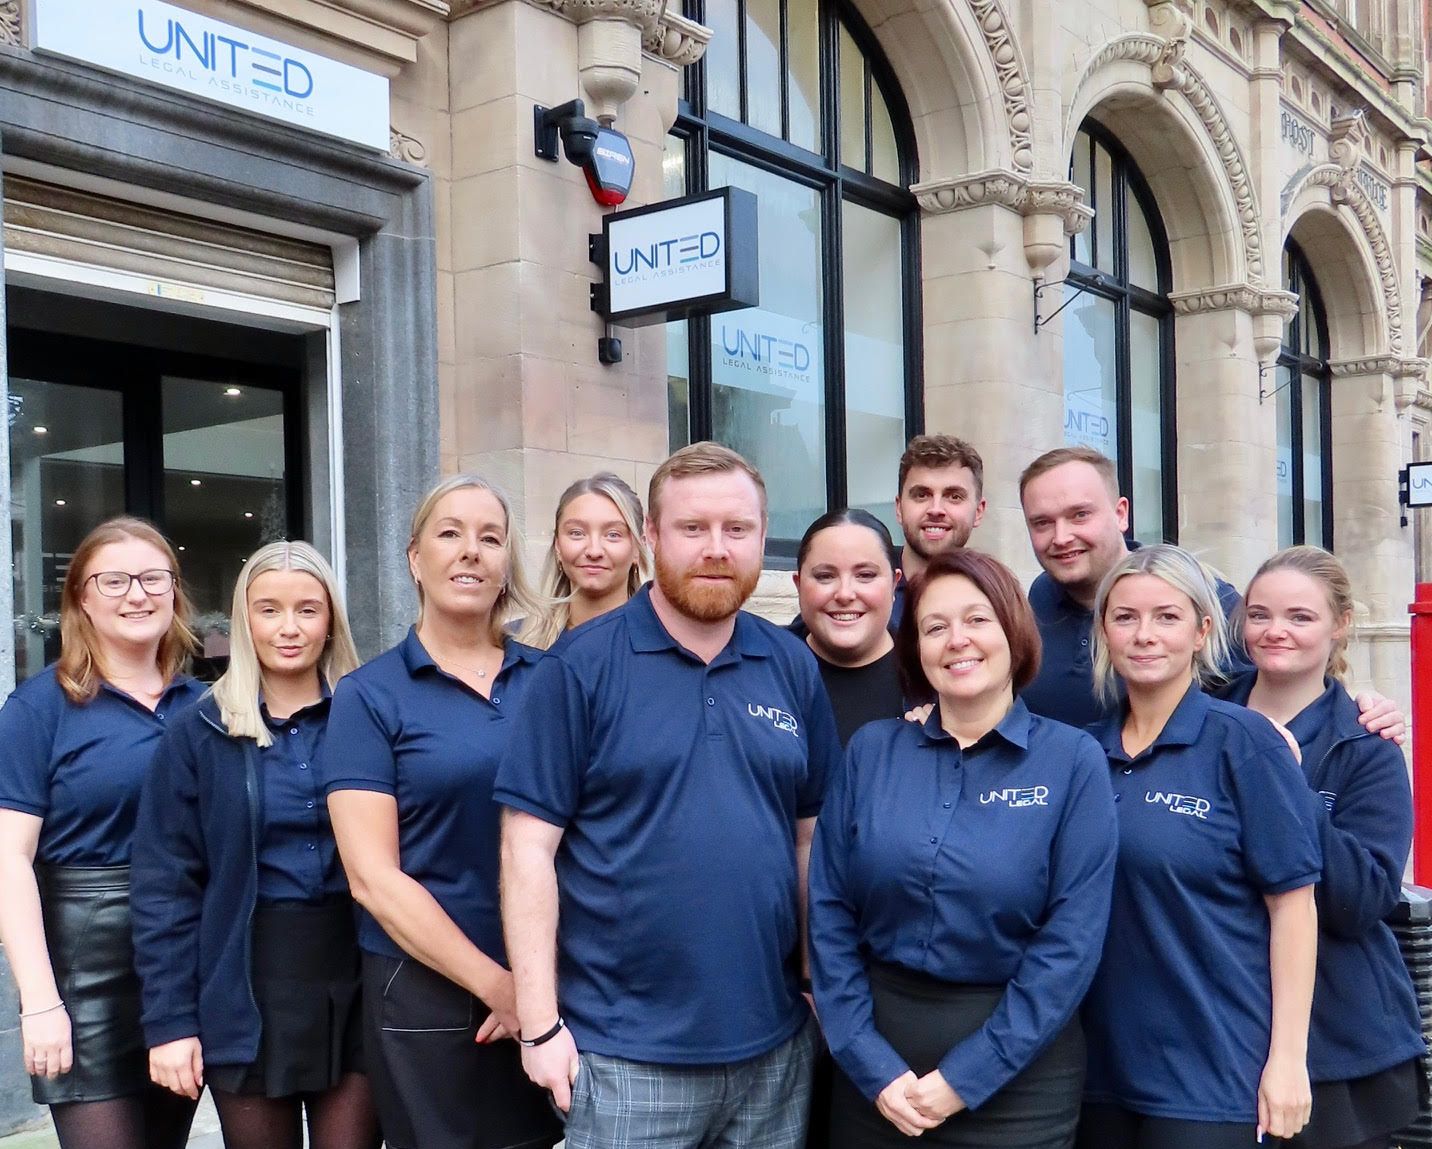 Workers at United Legal Assistance, one of the North Wests fastest growing claims management firms, have given their stamp of approval to their beautiful new office.